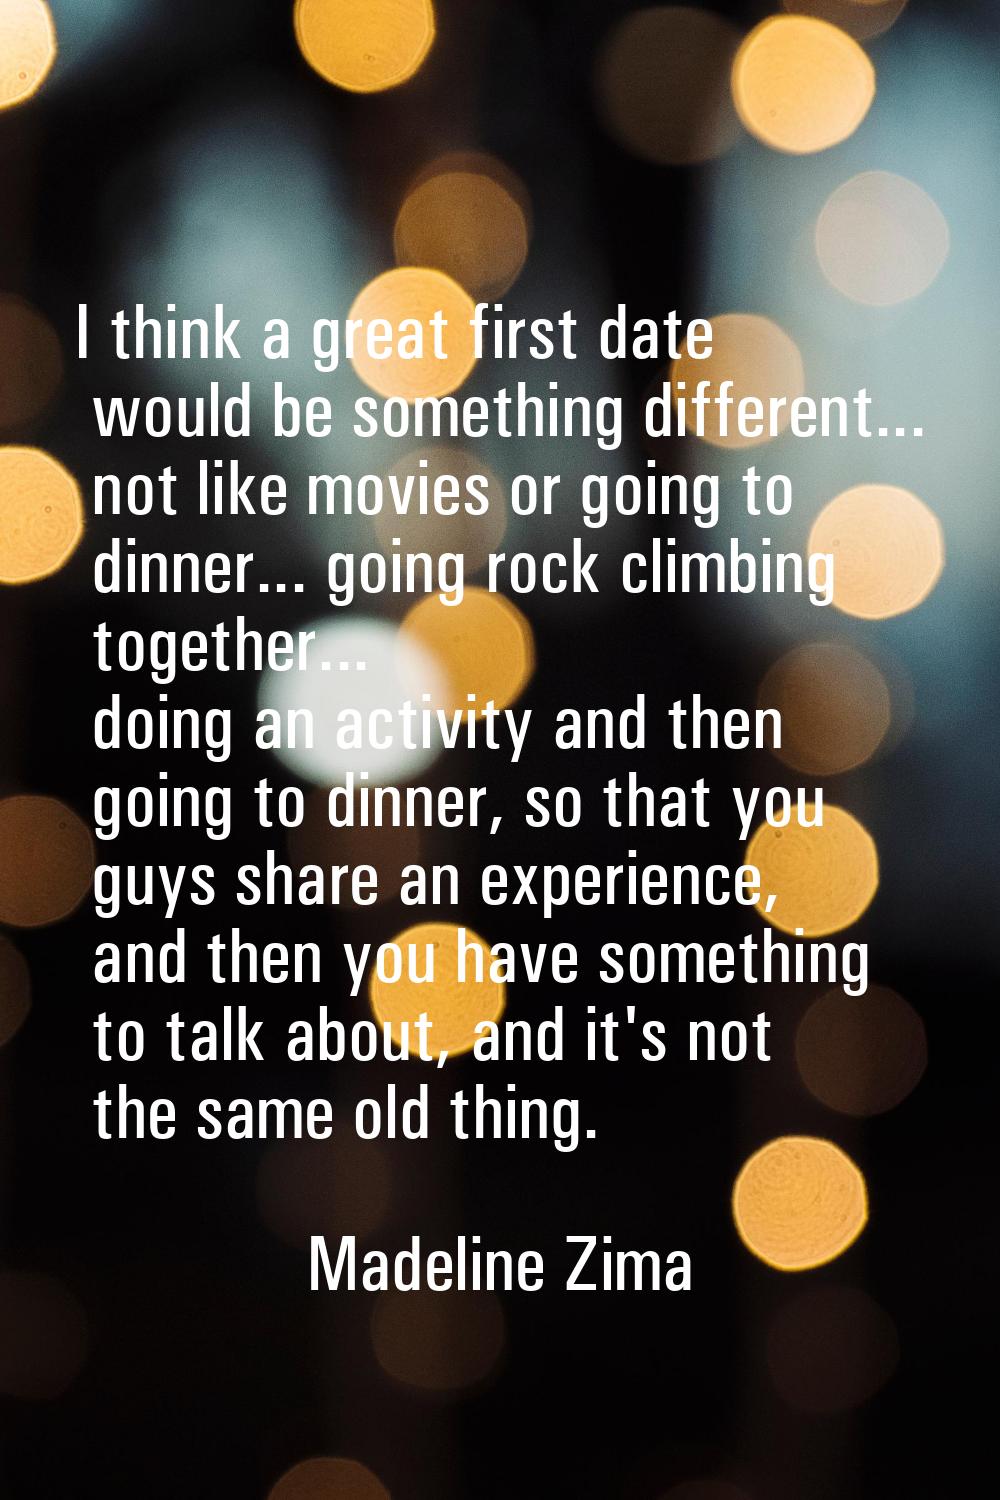 I think a great first date would be something different... not like movies or going to dinner... go